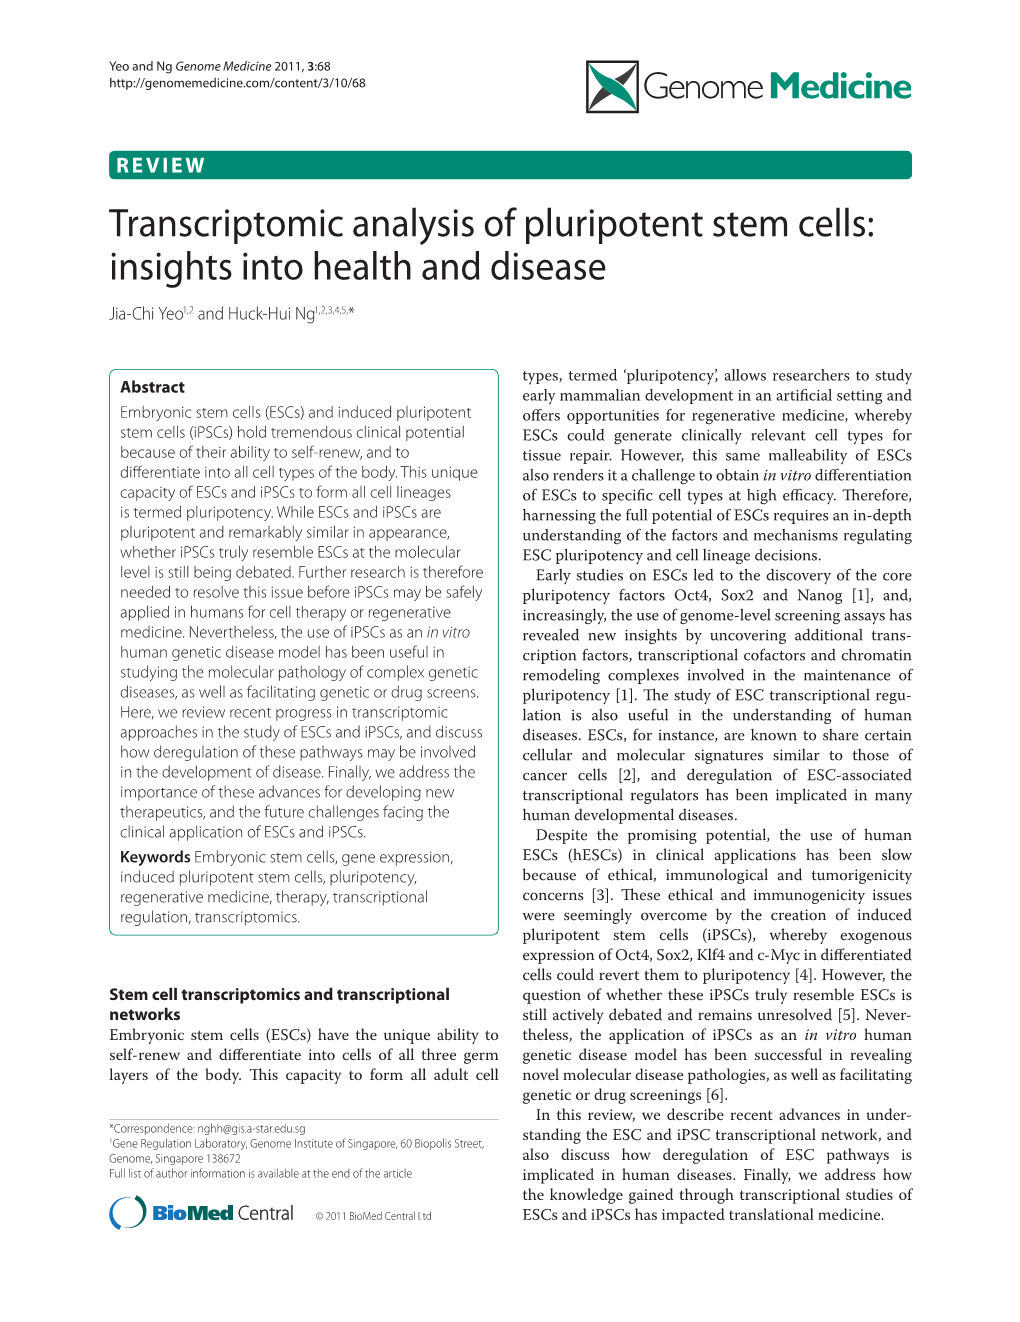 Transcriptomic Analysis of Pluripotent Stem Cells: Insights Into Health and Disease Jia-Chi Yeo1,2 and Huck-Hui Ng1,2,3,4,5,*